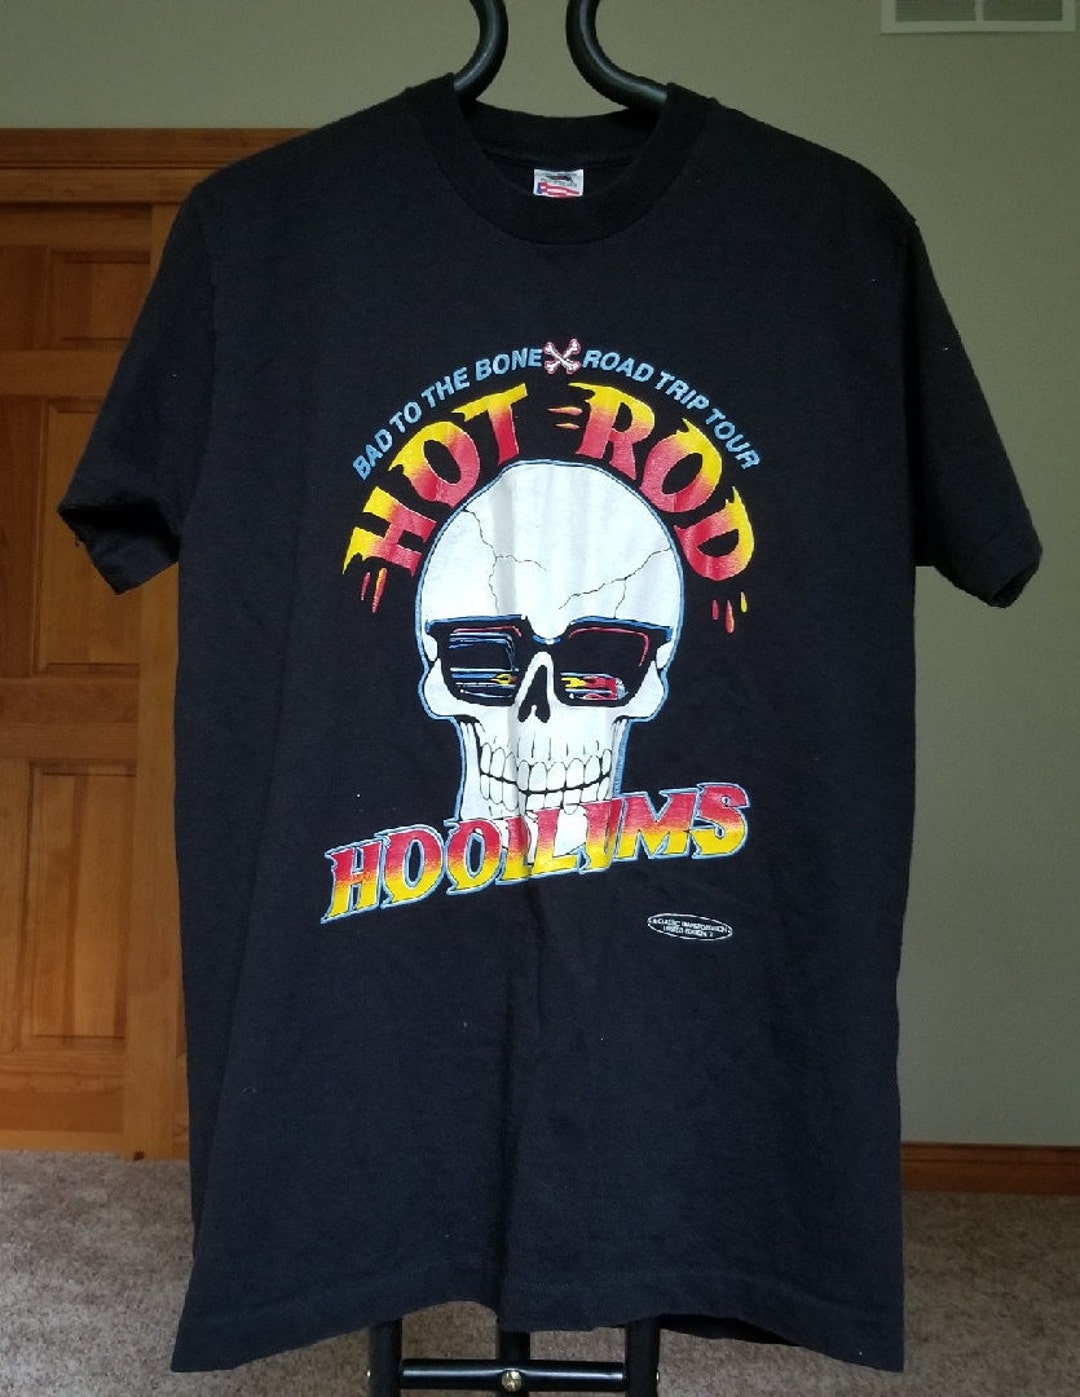 Vintage 80s / 90s Hot Rod Hoodlums Bad to the Bone Road Trip - Etsy